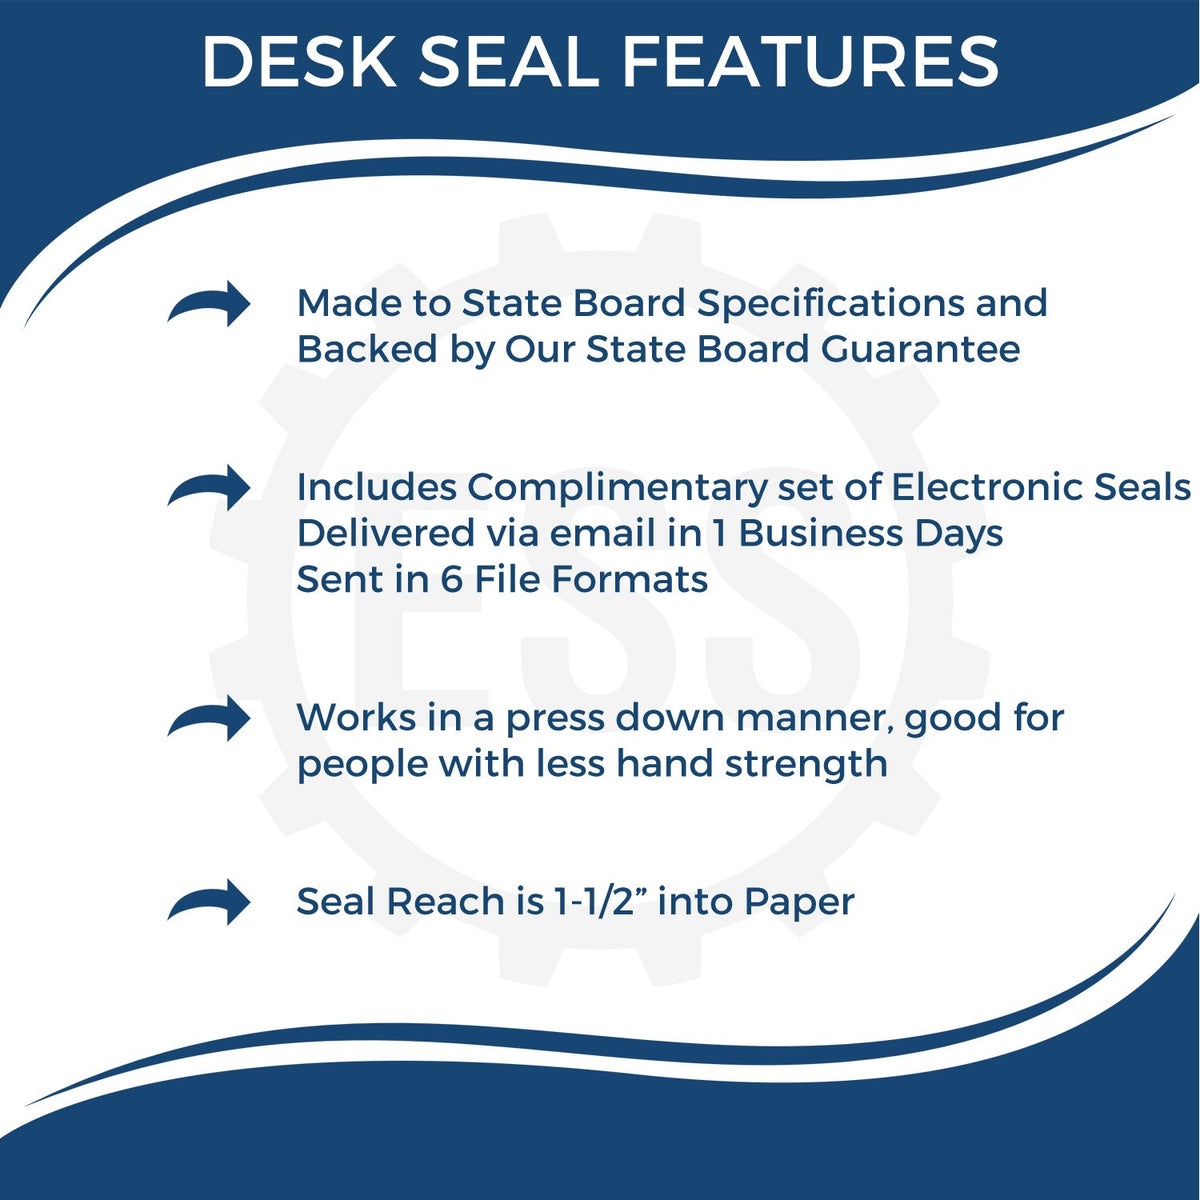 A picture of an infographic highlighting the selling points for the Virginia Desk Architect Embossing Seal